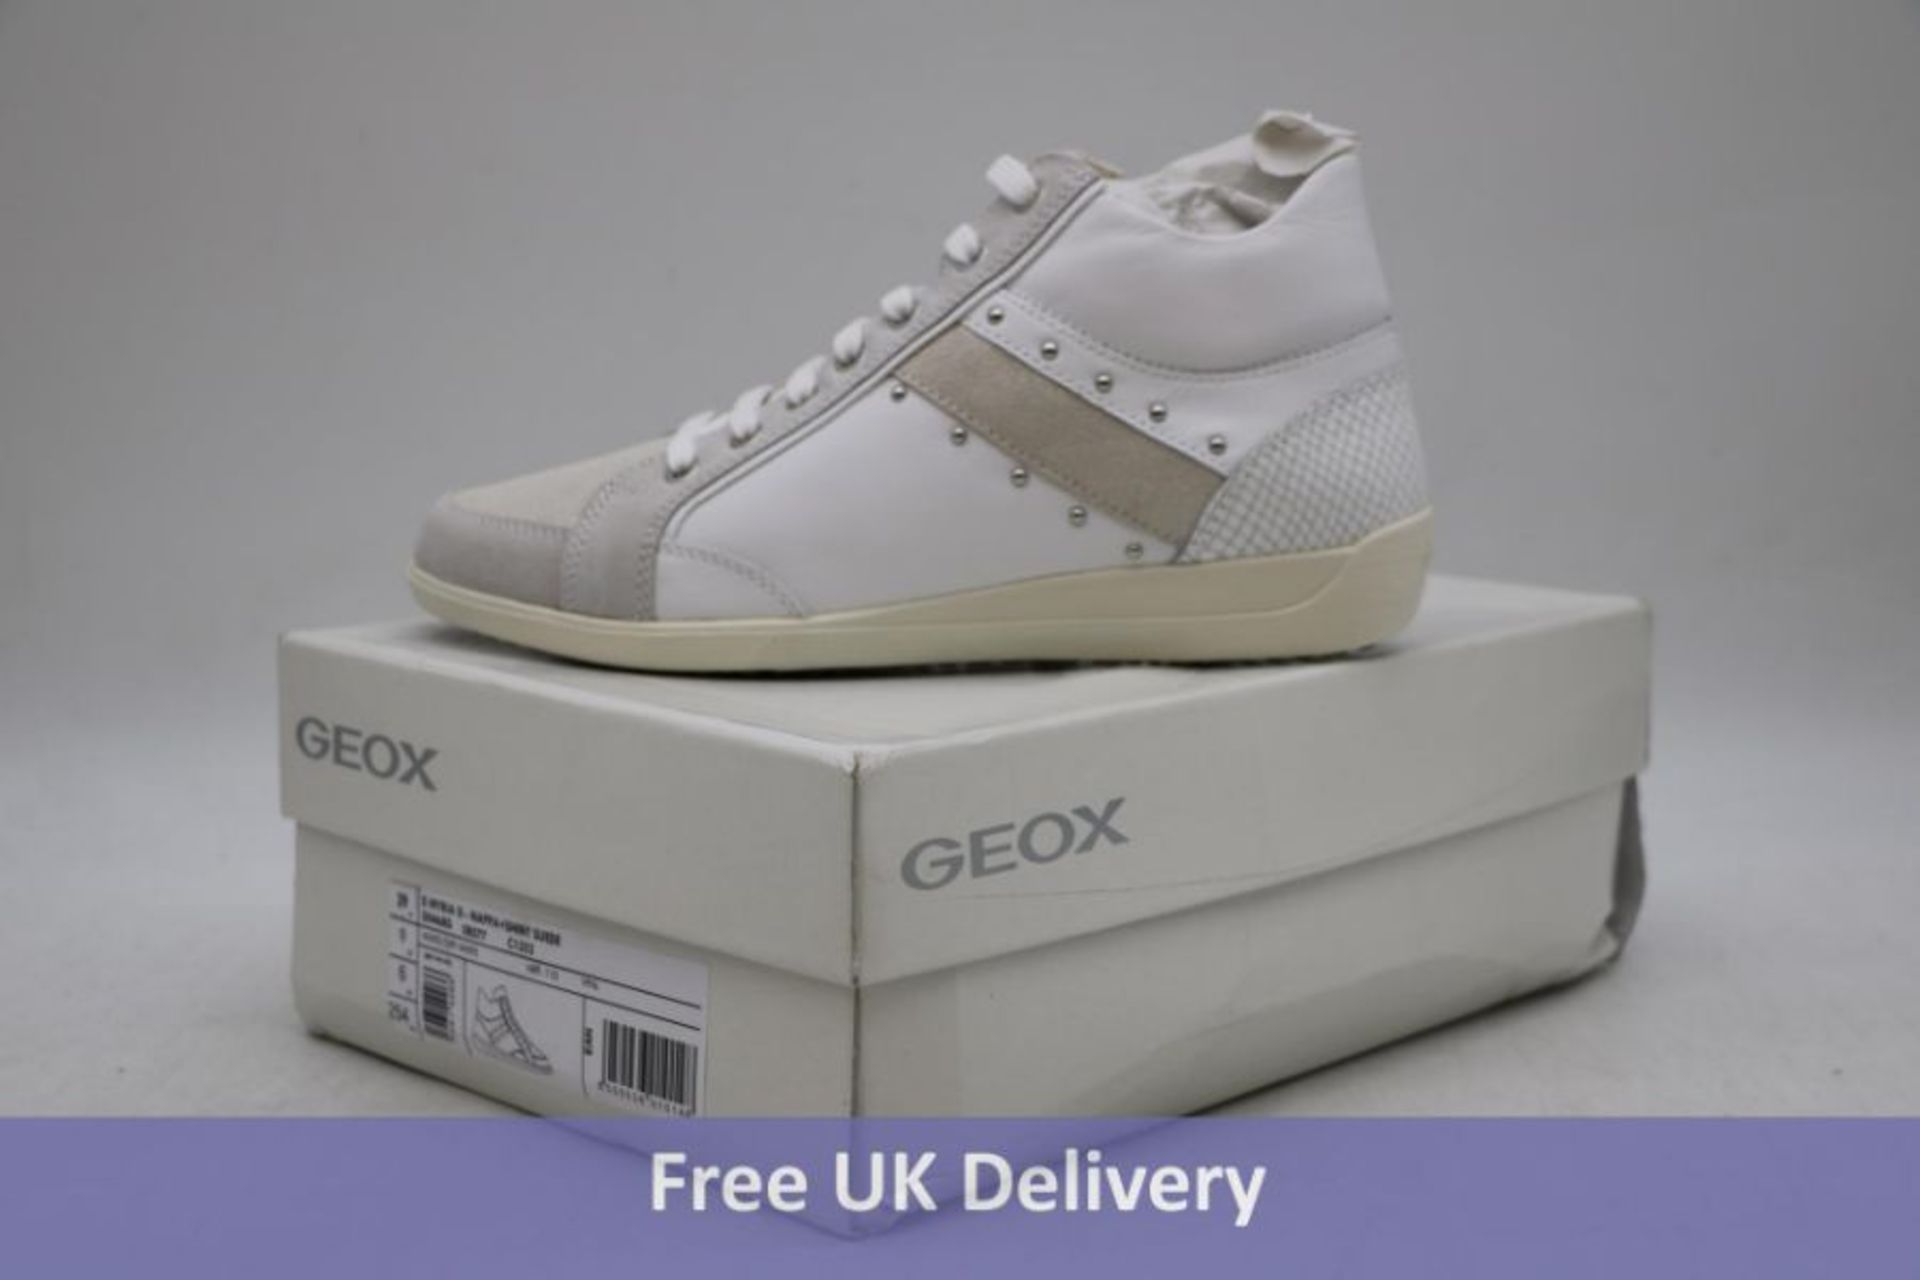 Geox Women's D Myria Shiny Suede Mid Trainers, White/Grey, UK 6